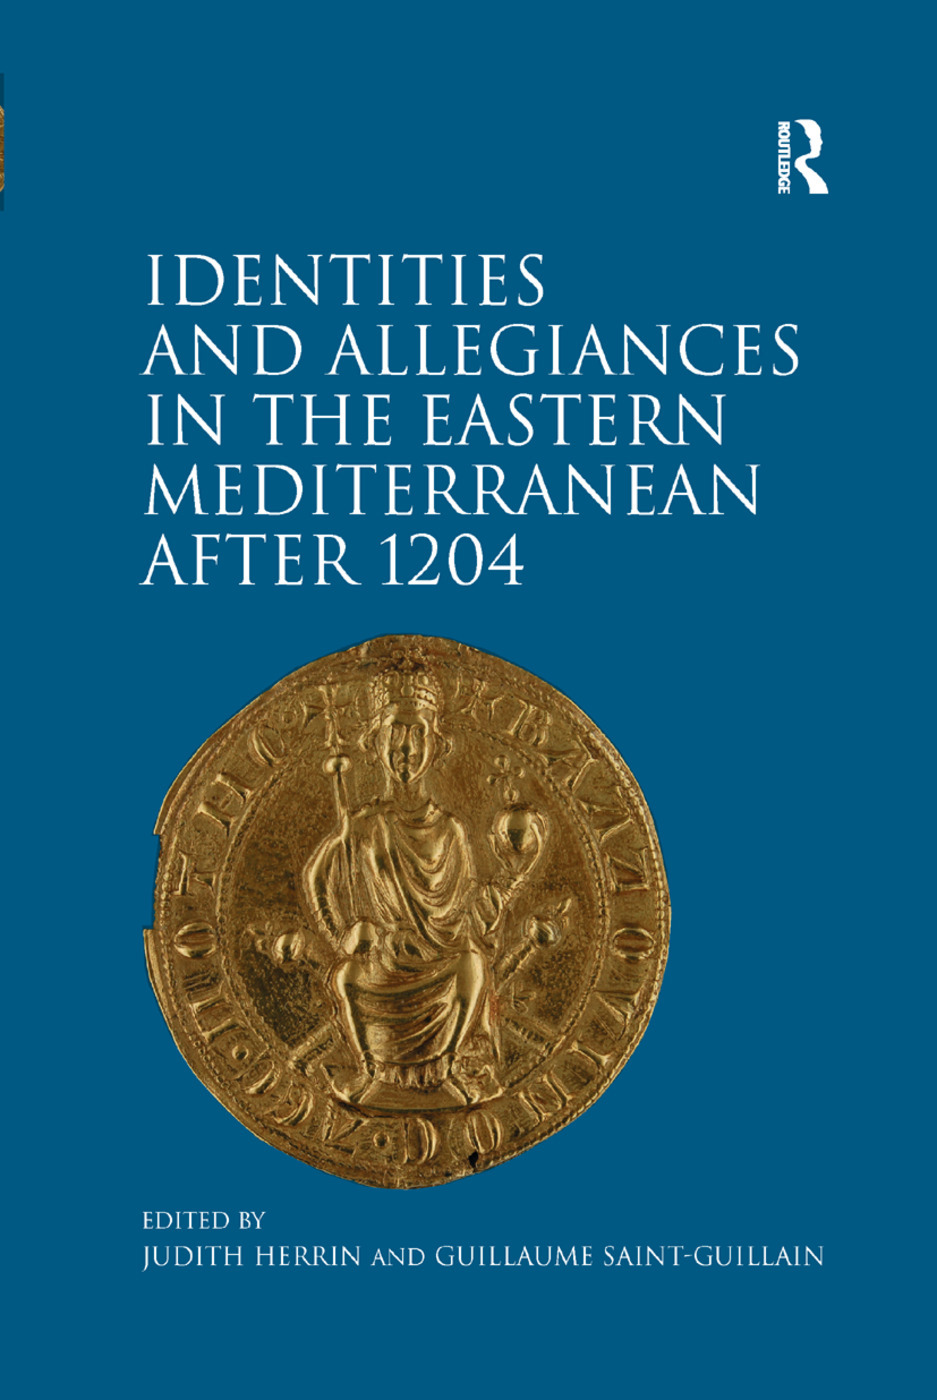 Review of Judith Herrin and Guillaume Saint-Guillain, <i>Identities and Allegiances in the Eastern Mediterranean after 1204</i> (Farnham: Ashgate, 2011), in <i>Speculum</i> 88, no. 2 (2013): 523-524. [G. Page]